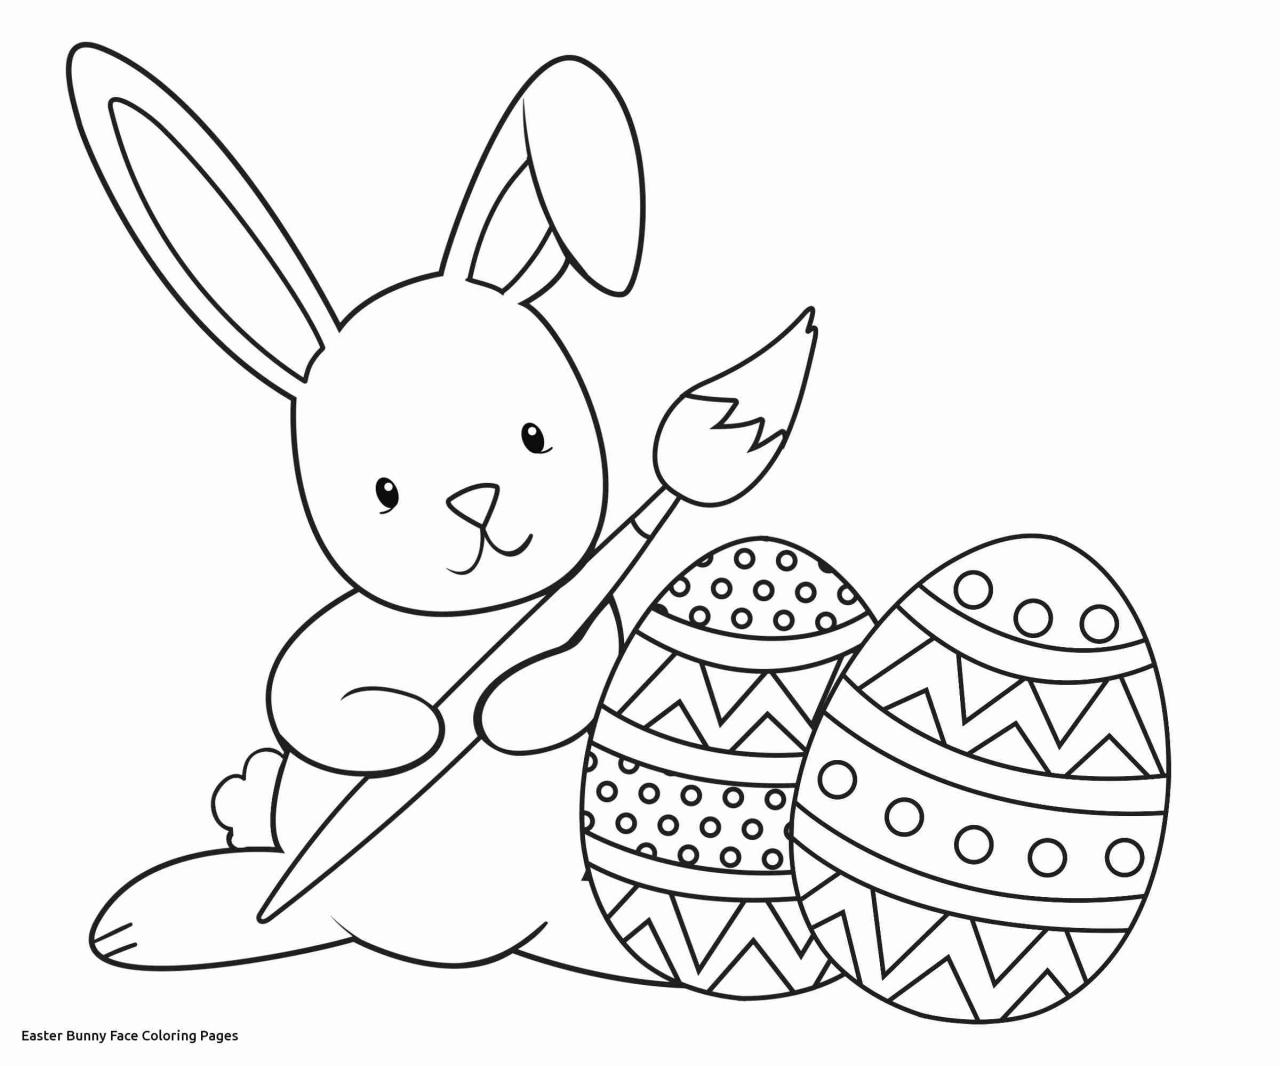 Easter Bunny Face Coloring Pages at Free printable